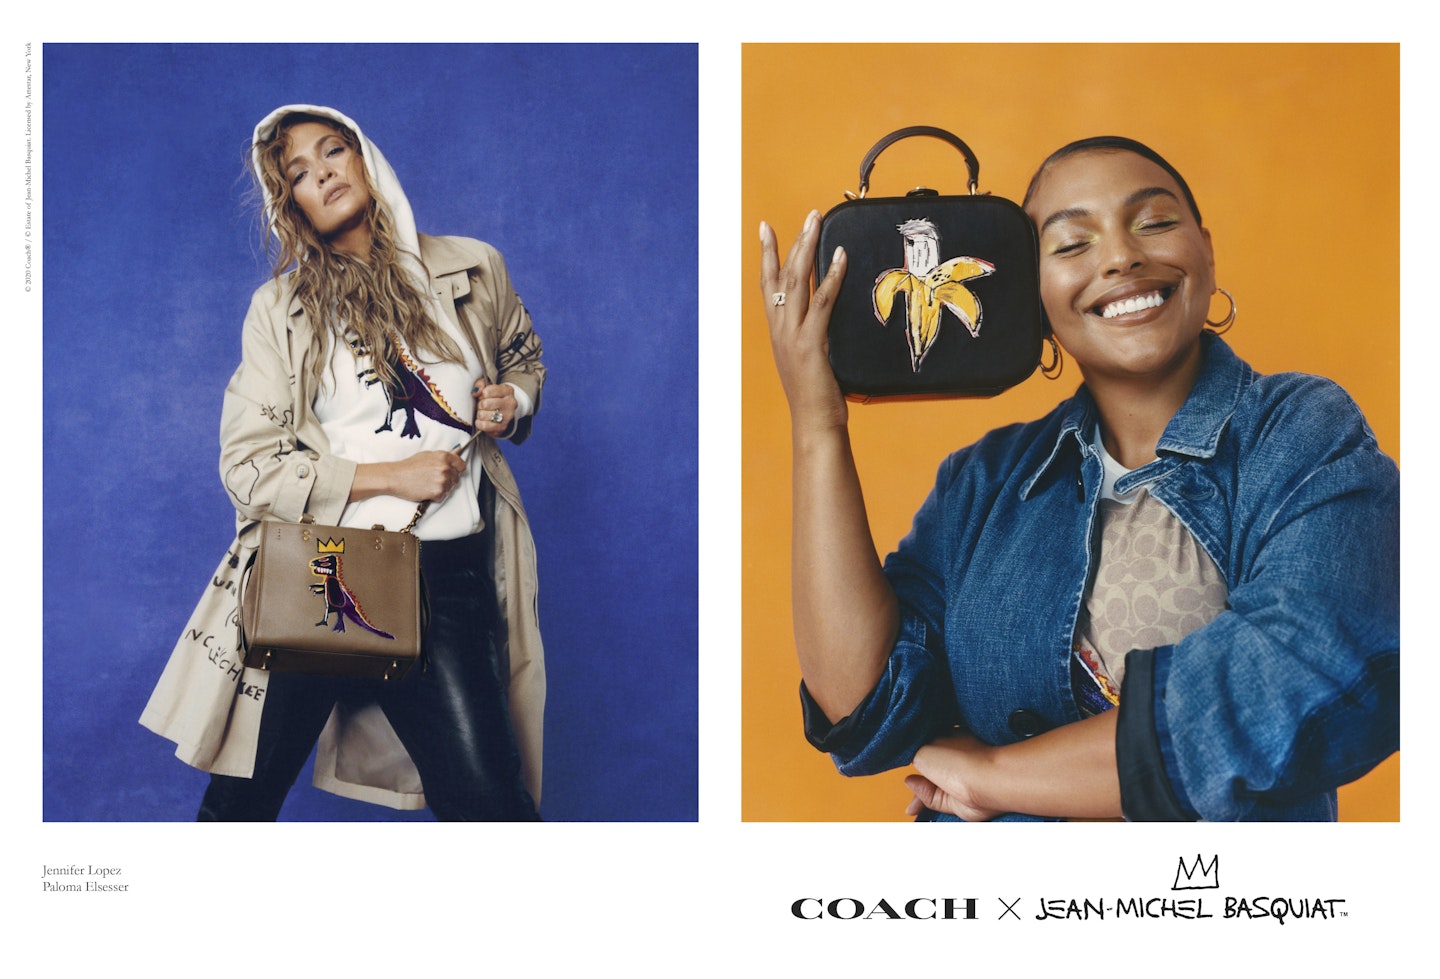 Jennifer Lopez and Paloma Elsesser in the Coach x Jean-Michel Basquiat campaign